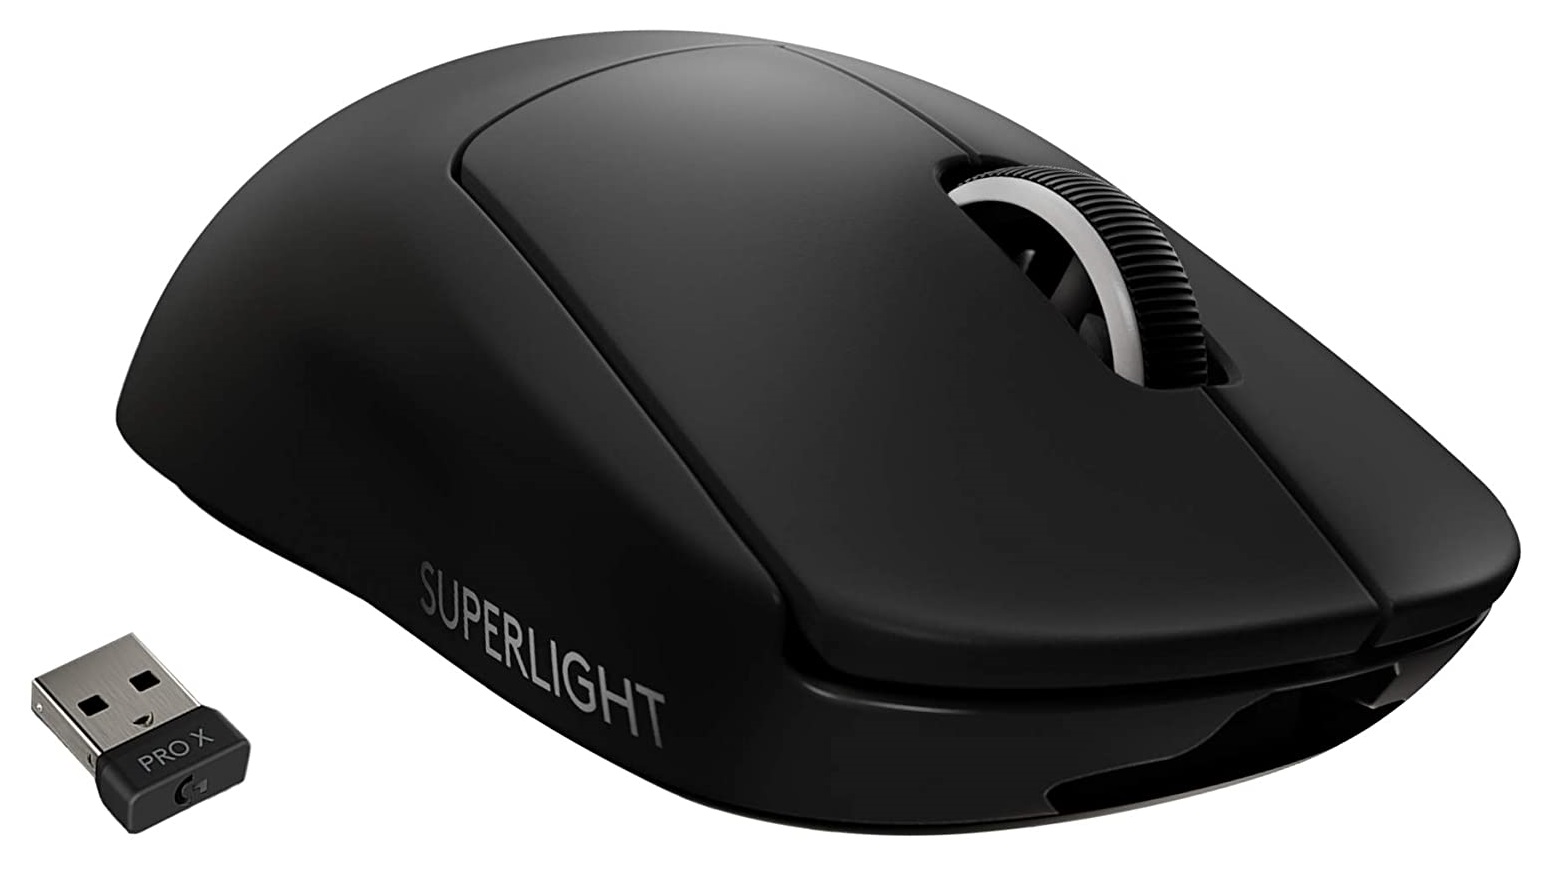 logitech g pro x gaming mouse - The best Logitech gaming mice